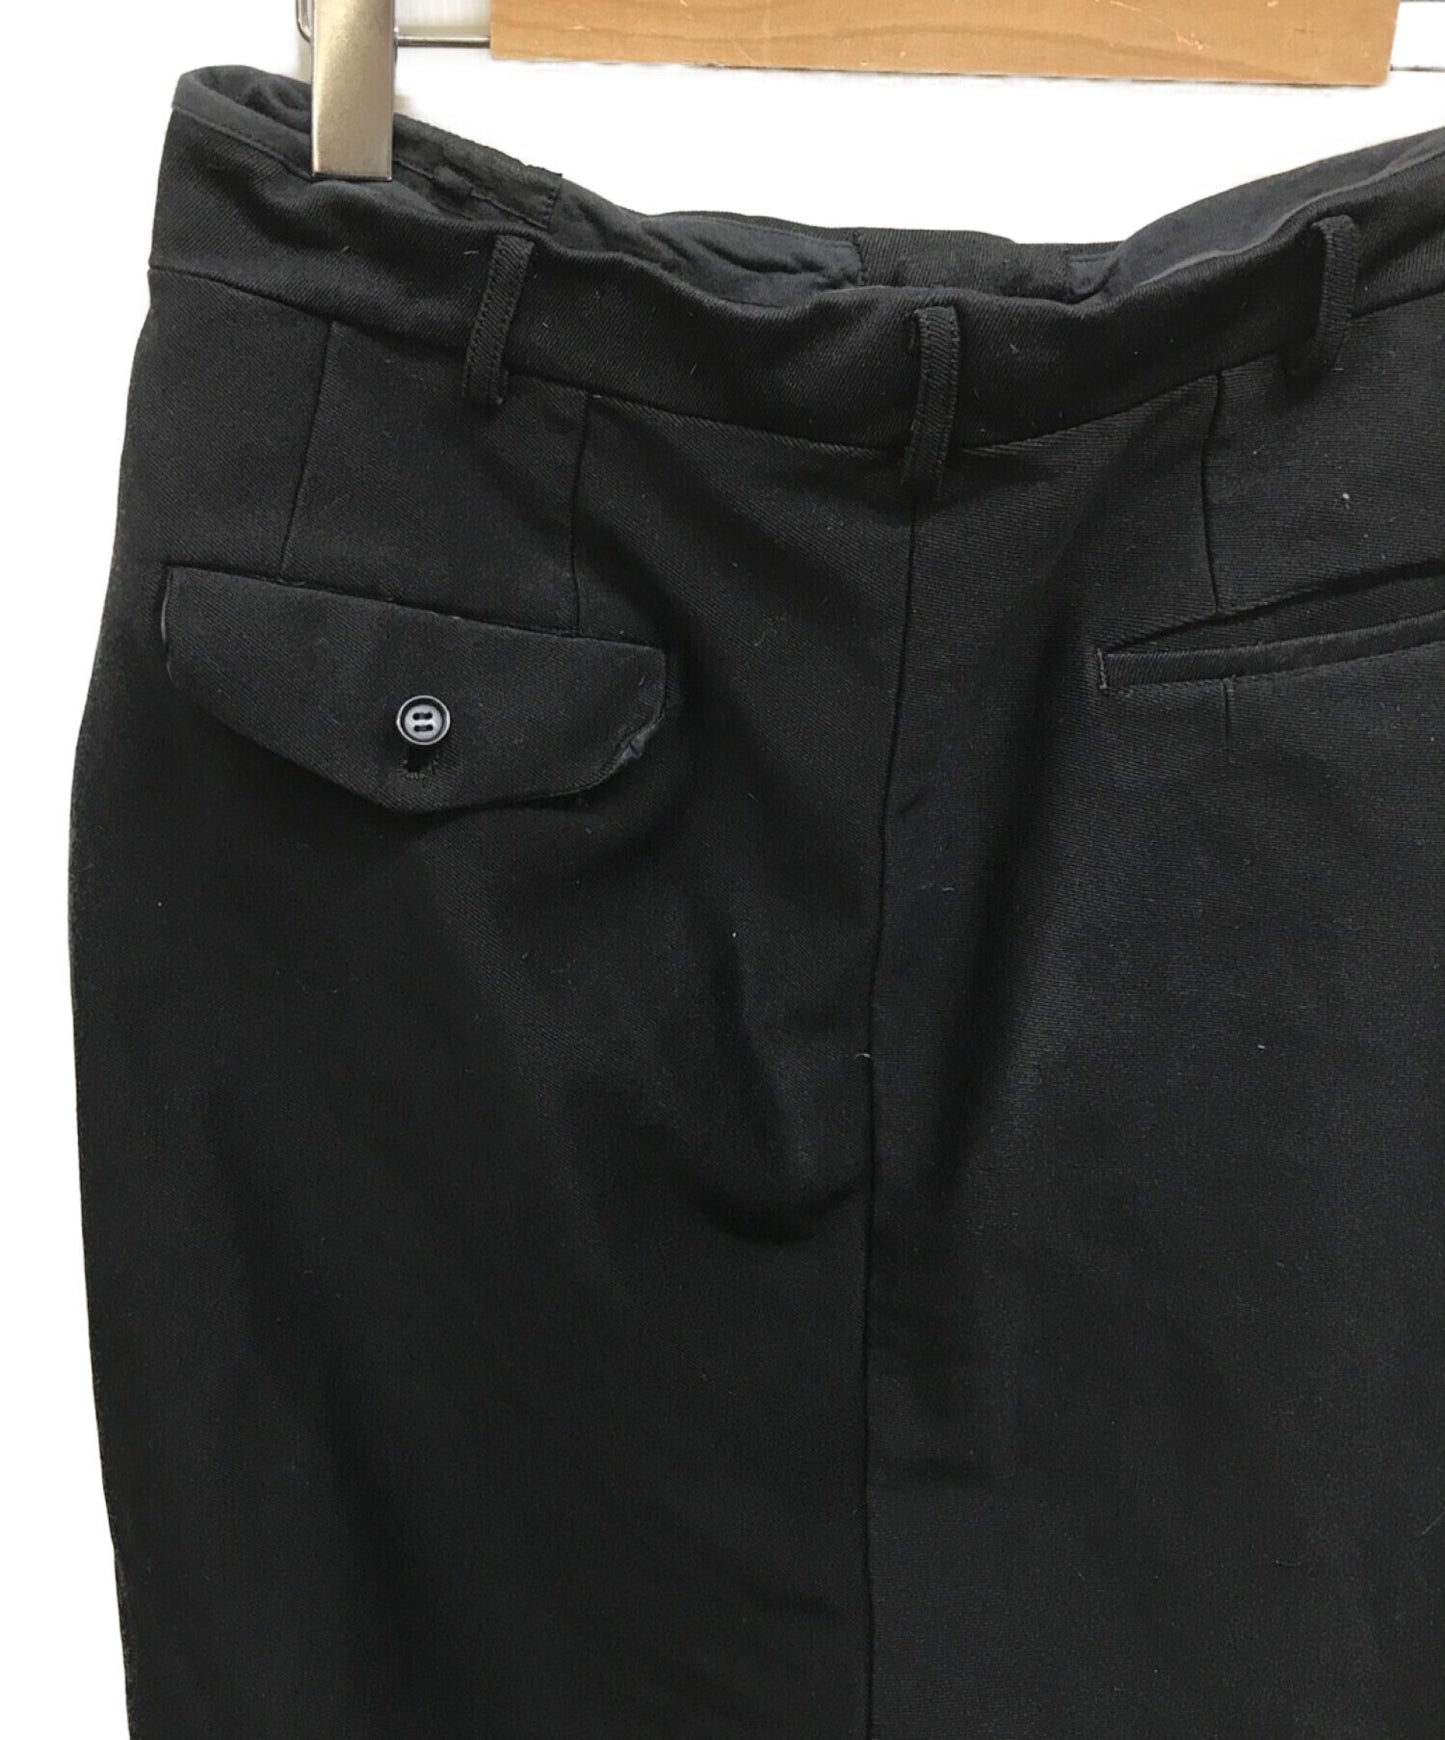 COMME DES GARCONS HOMME 제품 중심의 SAROUEL TAPERED TUCK PANTS HD-P019